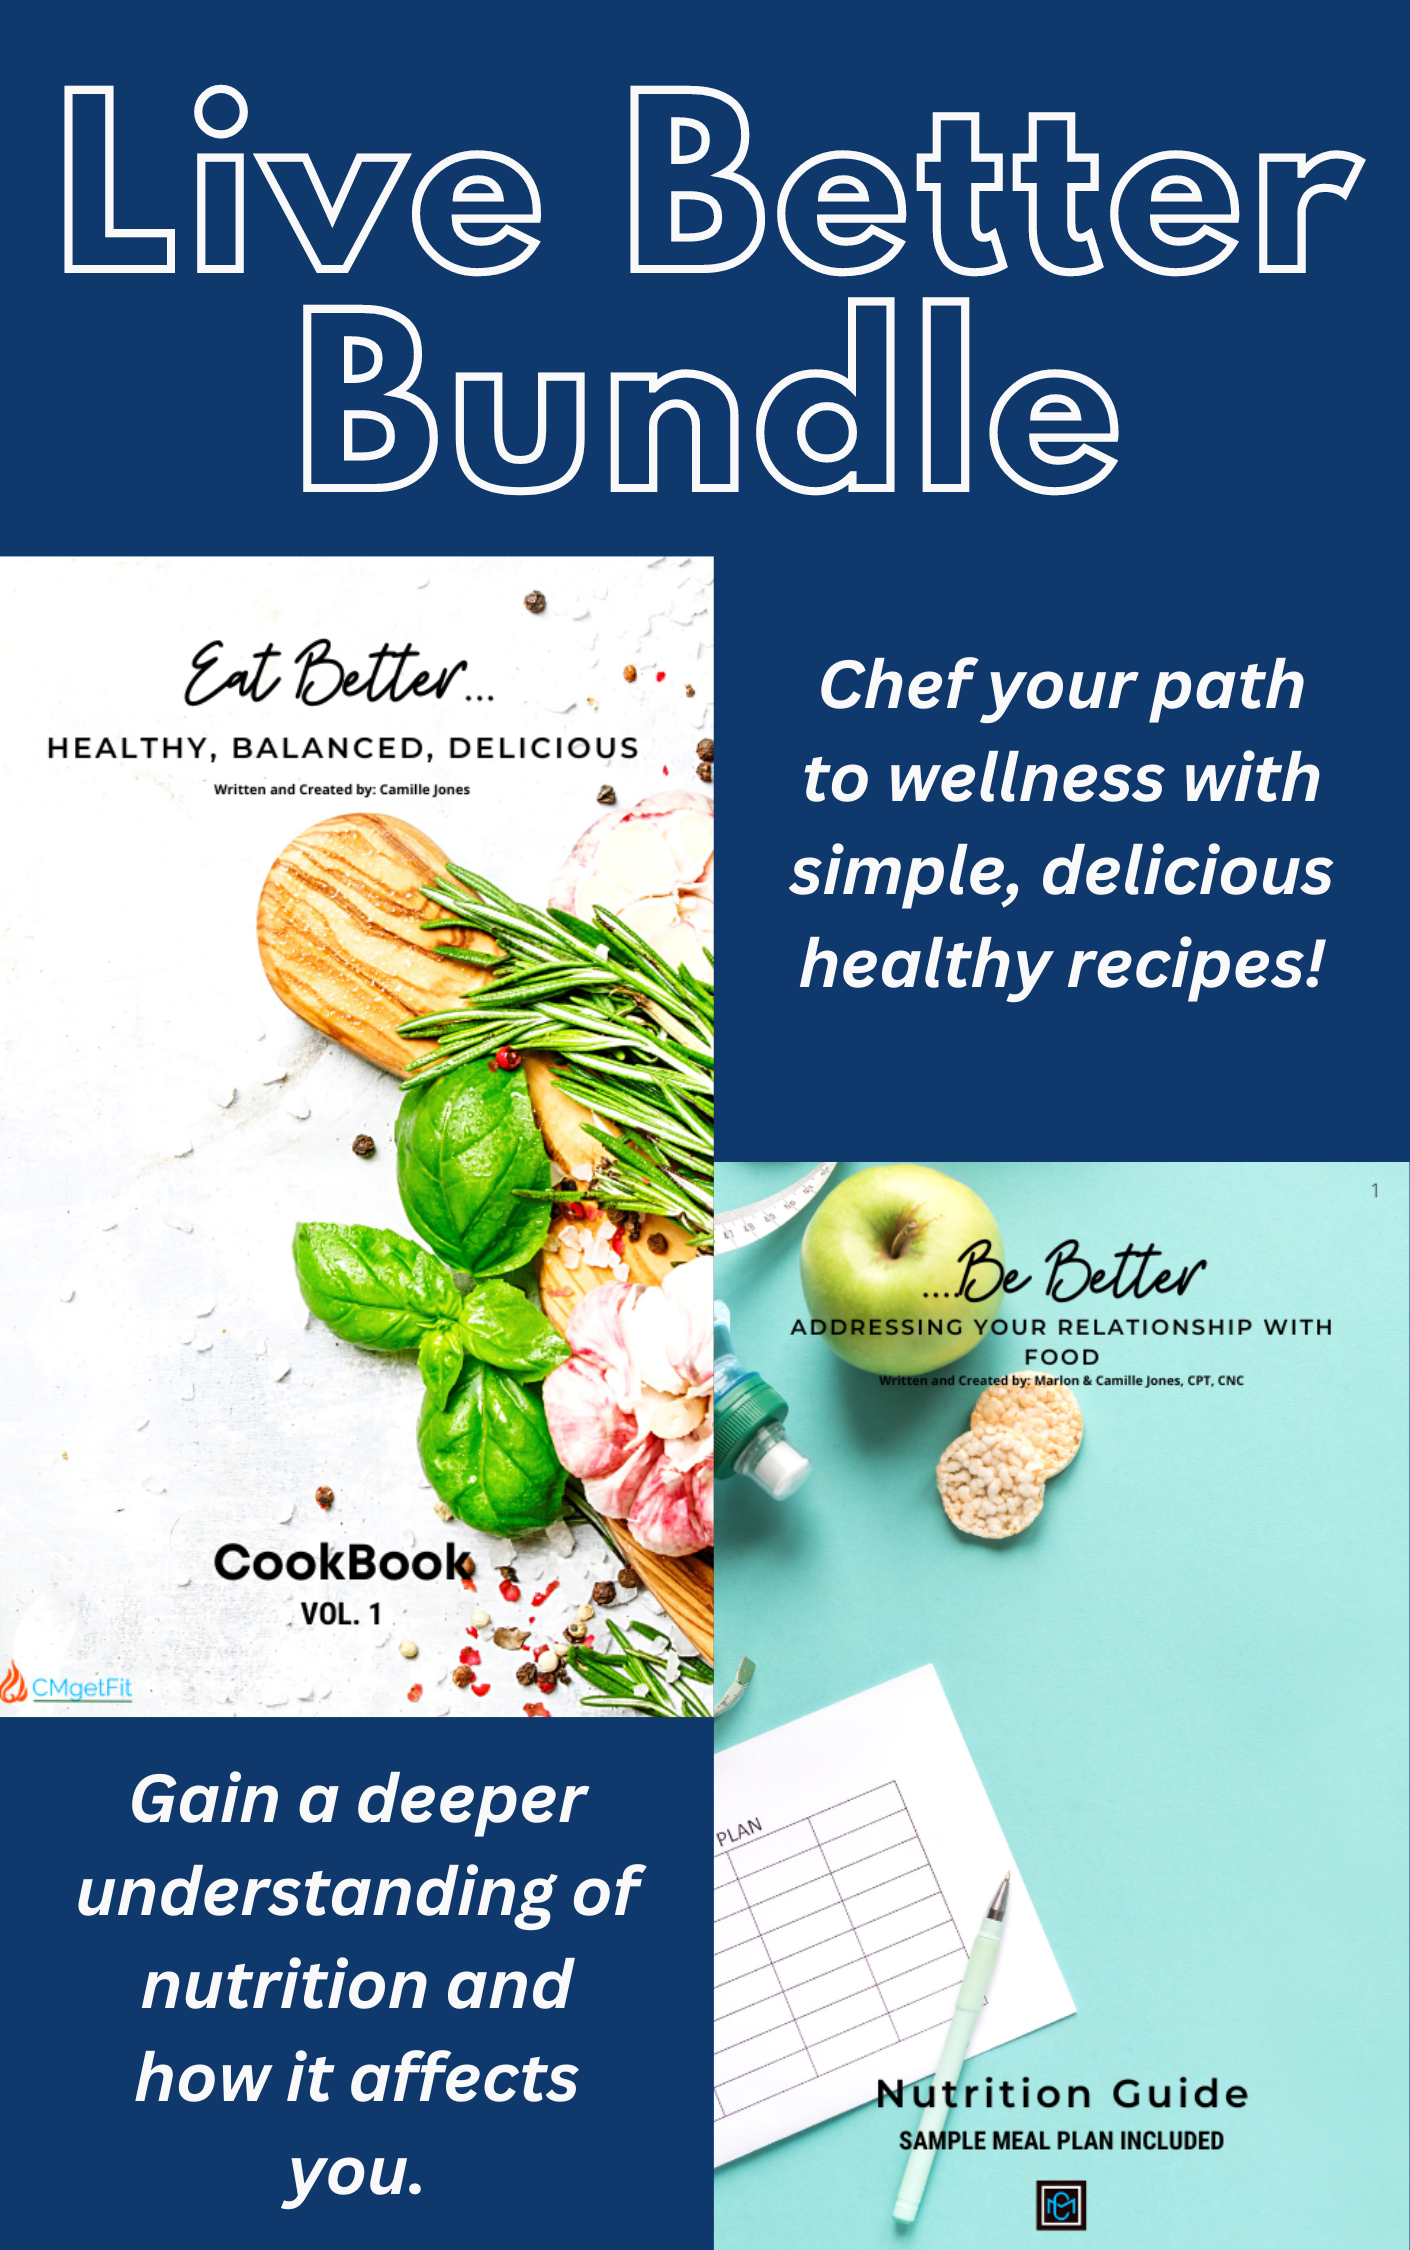 Live Better Bundle Deal- BOTH the "Eat Better..." Cookbook and the "...Be Better" Nutrition Guide